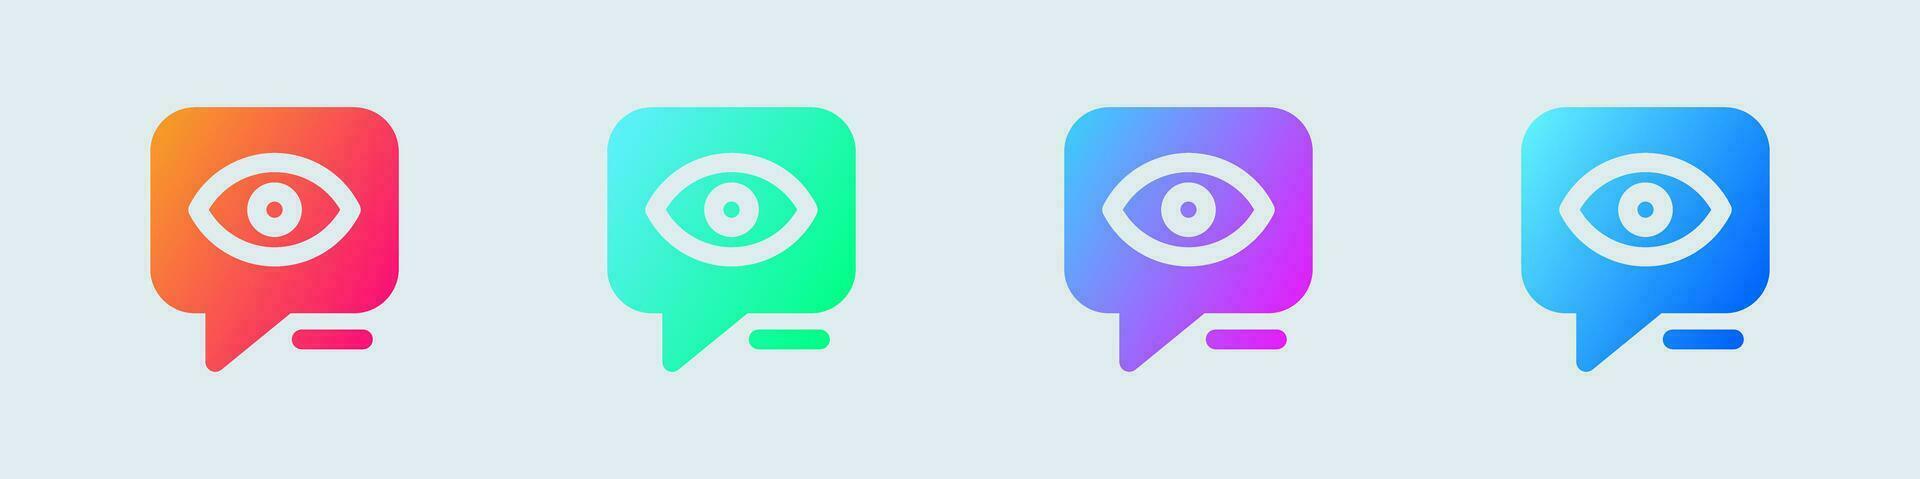 Views solid icon in gradient colors. Eye signs vector illustration.